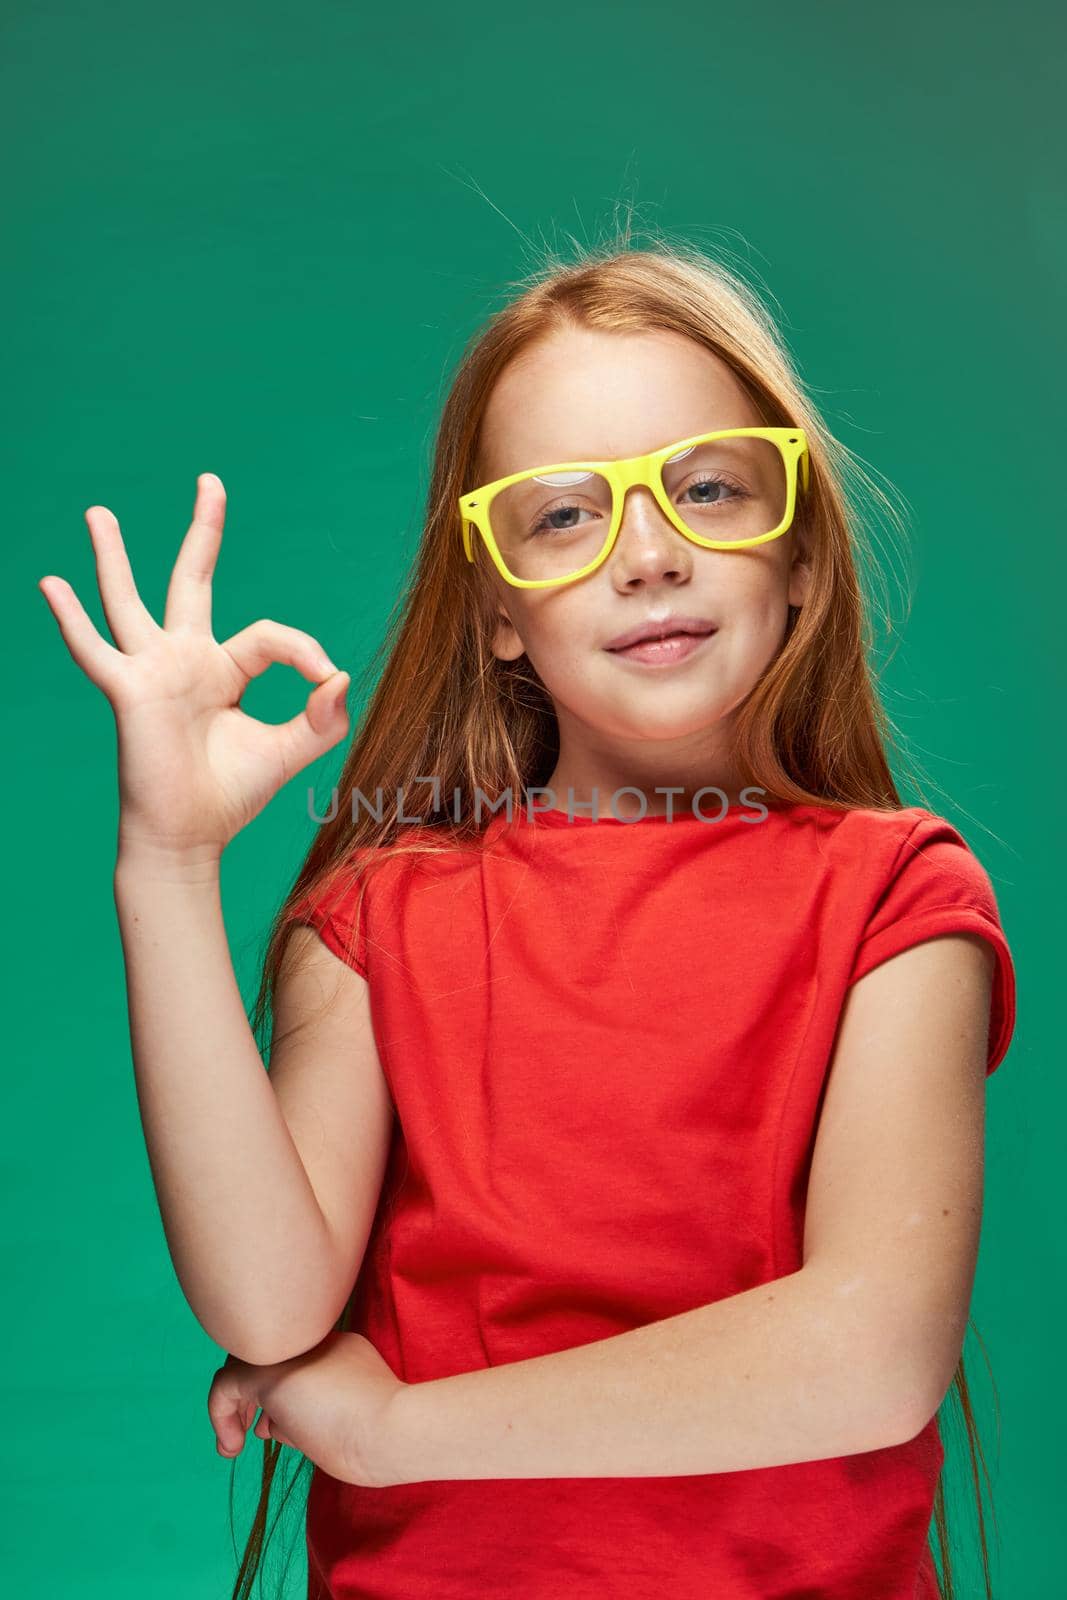 redhead girl with yellow glasses gesturing with her hands childhood learning Green background. High quality photo